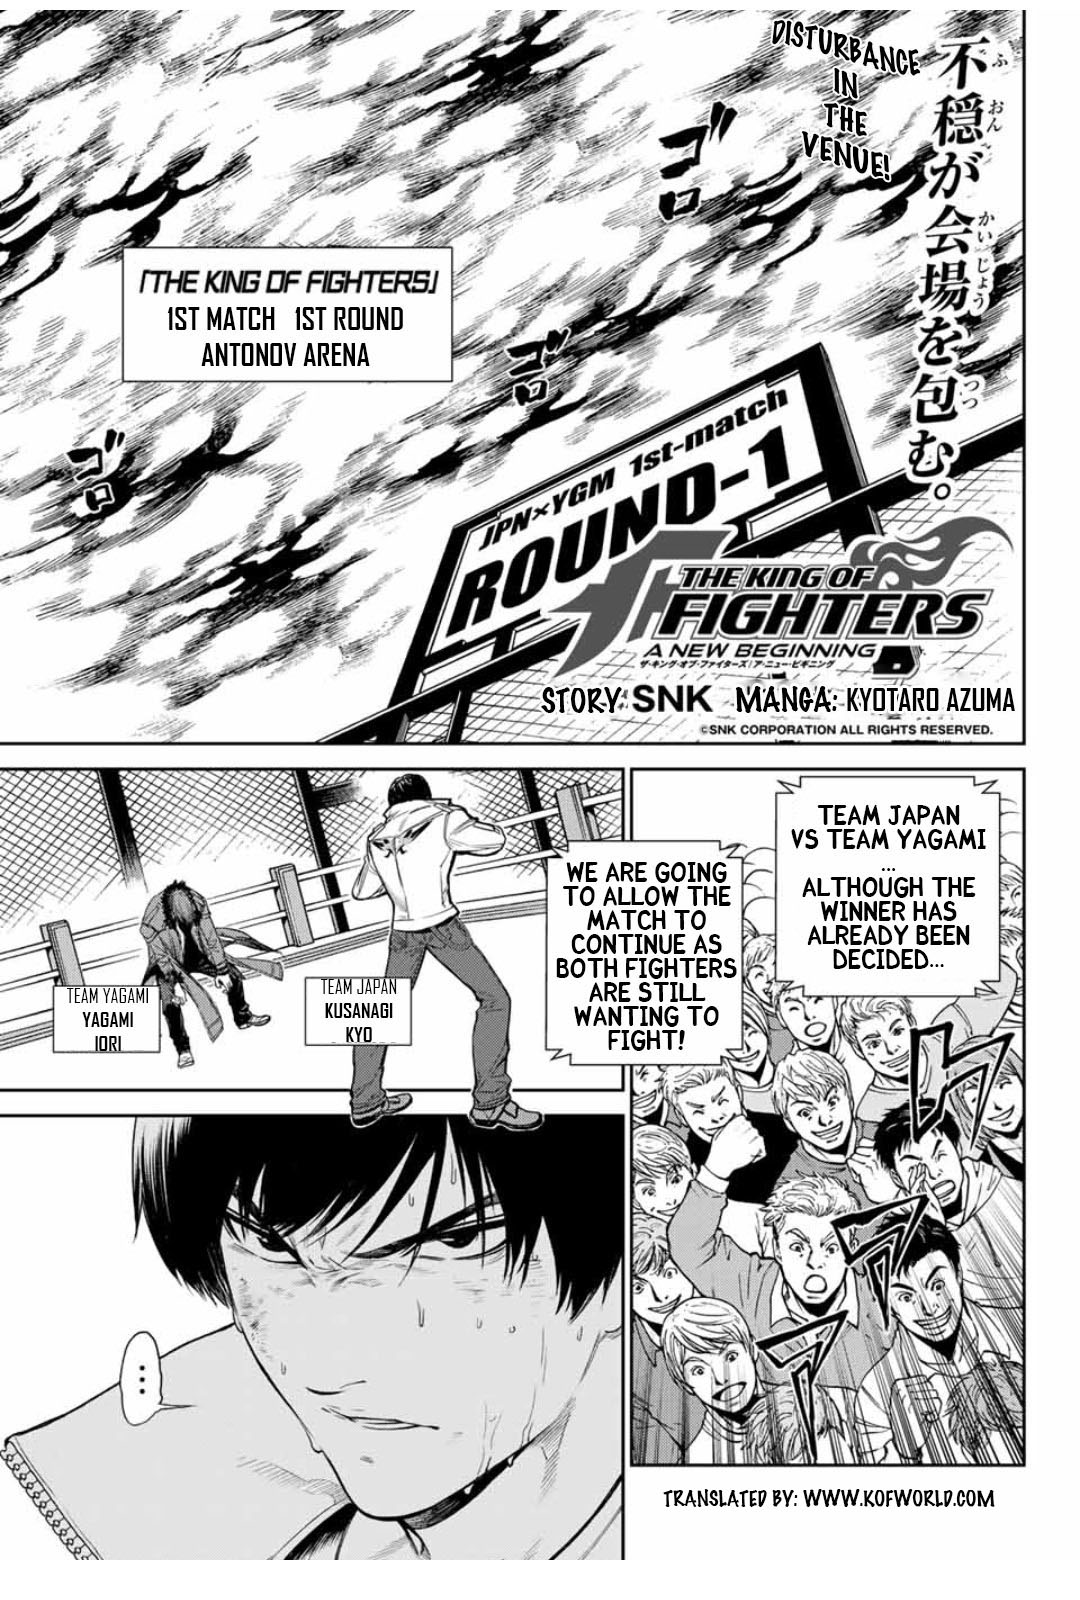 The King of Fighters: A New Beginning Vol. 2 Ch. 6.1 Team Japan vs Team Yagami 4th